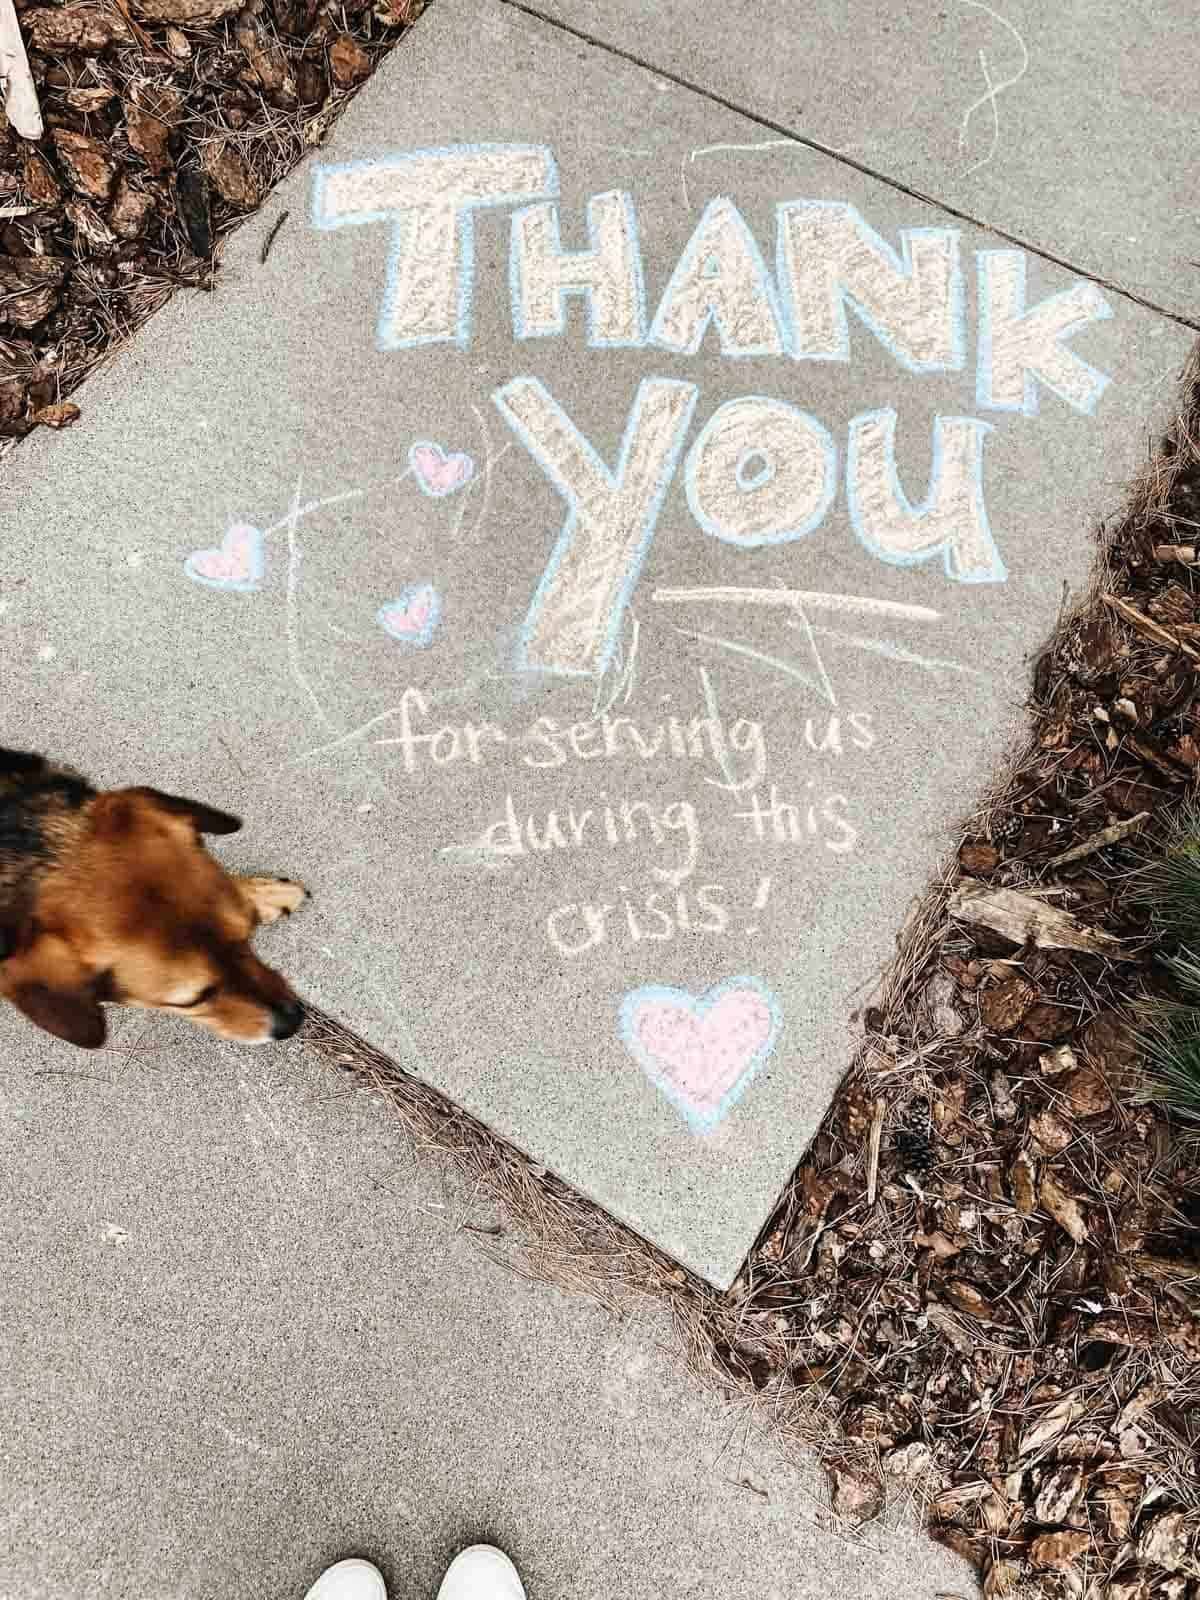 A dog walking next to a message on a tile that thanks people who served during Covid.